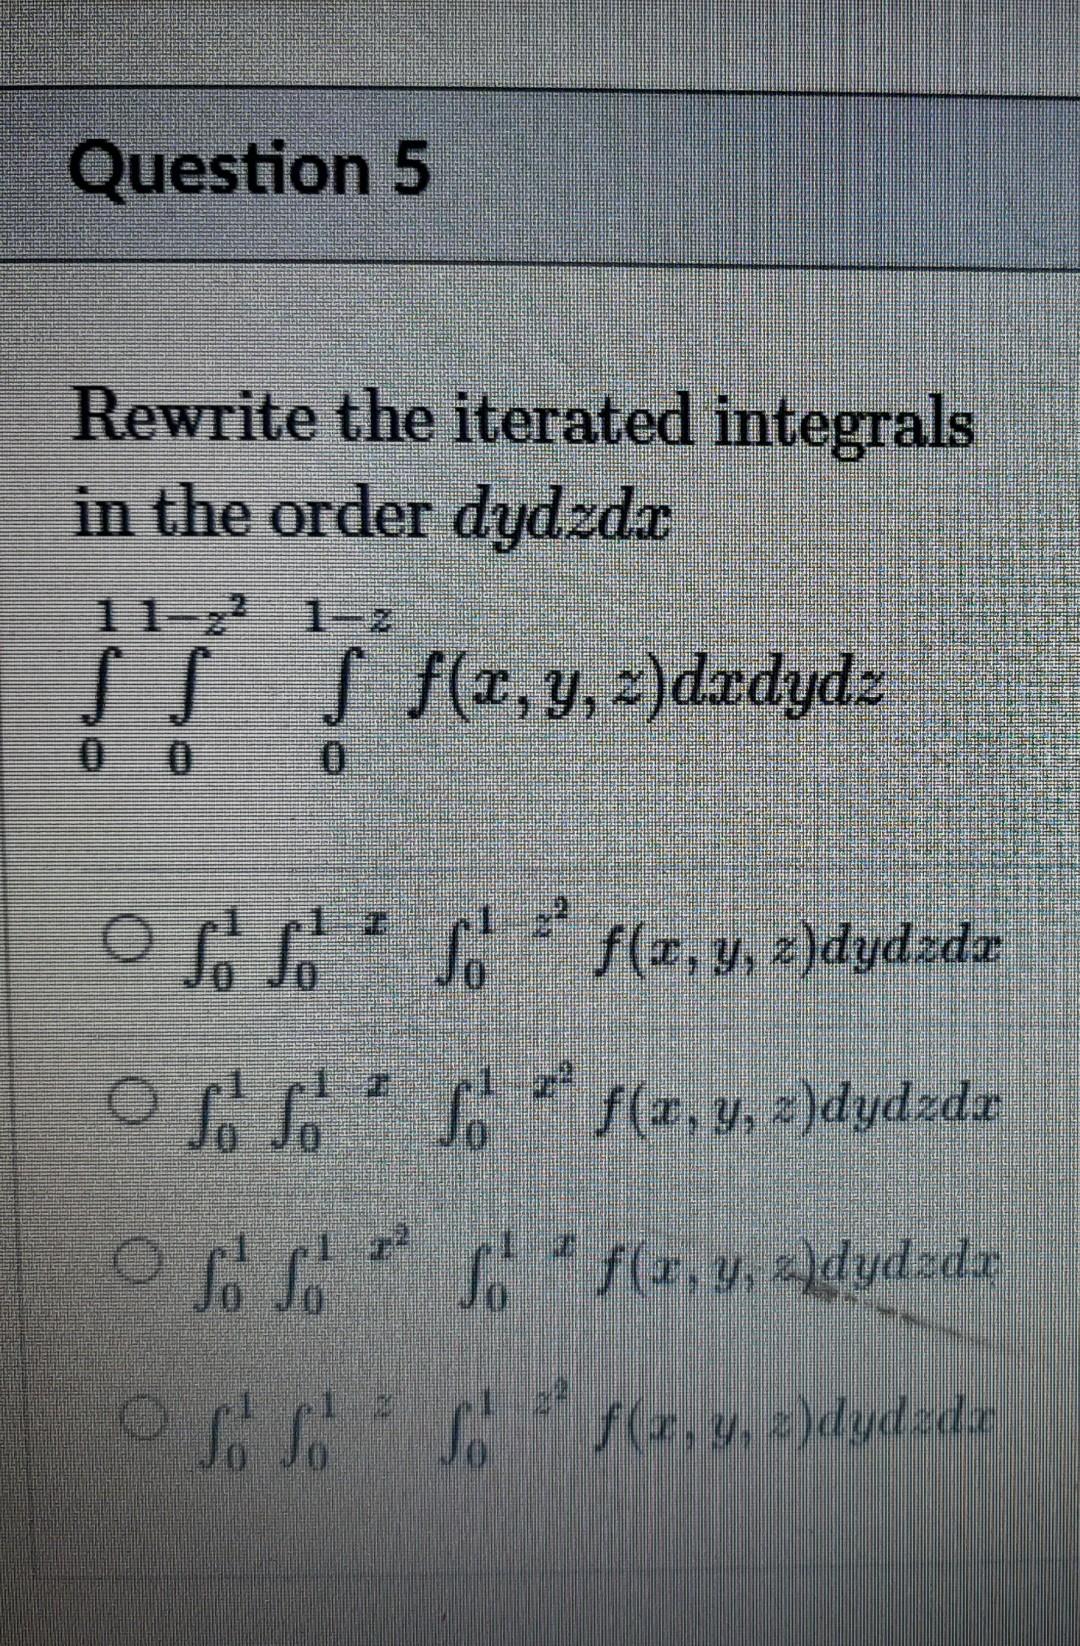 Question 5 Rewrite The Iterated Integrals In The Order Dydzdx 11 1 2 Sss F X Y Z Dxdydz 0 O So Solo F Y Z Dydzd 1